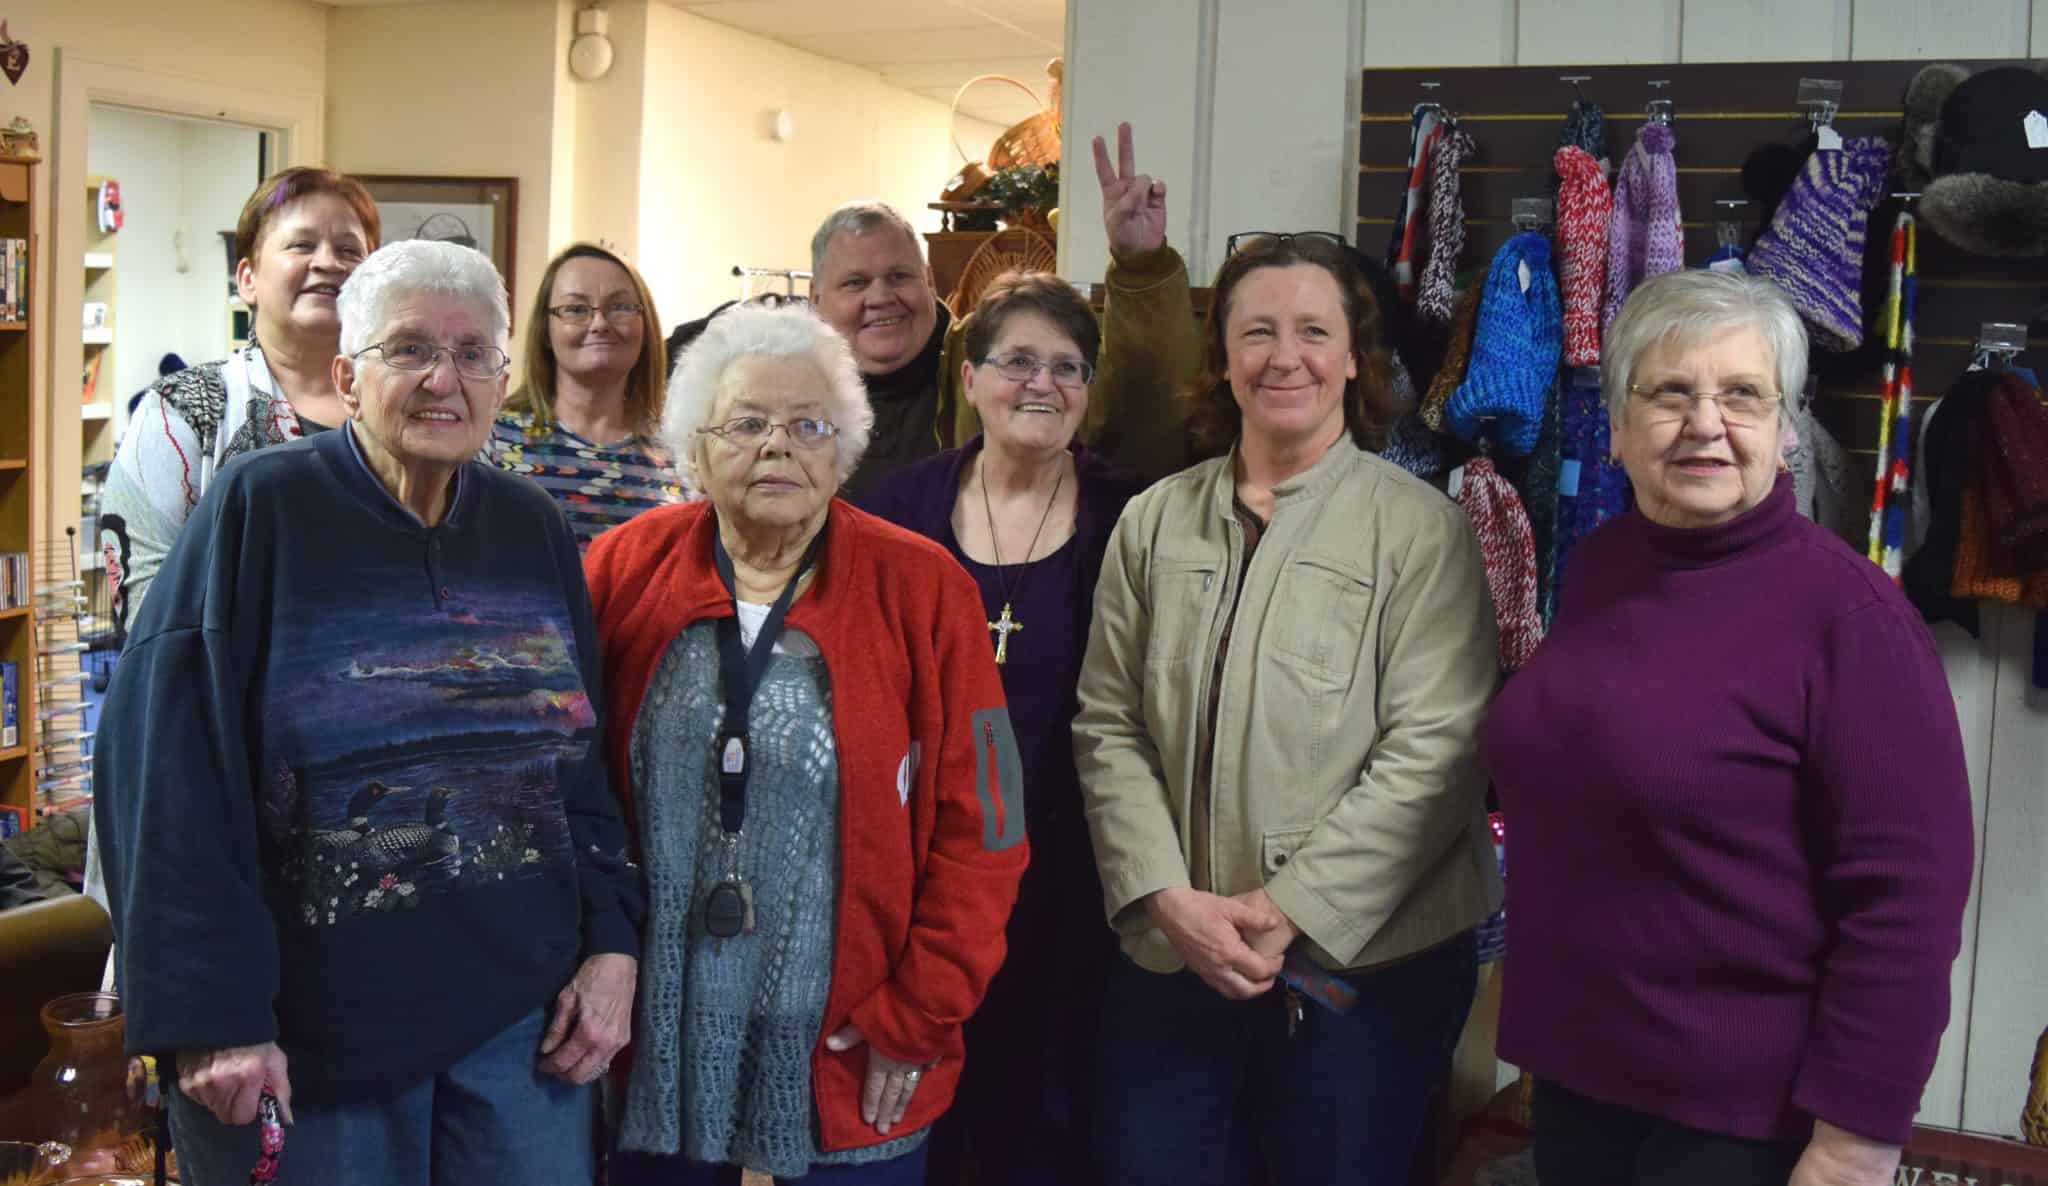 Tomahawk Community Thrift Shop awards nearly $9,000 in grants to local nonprofits